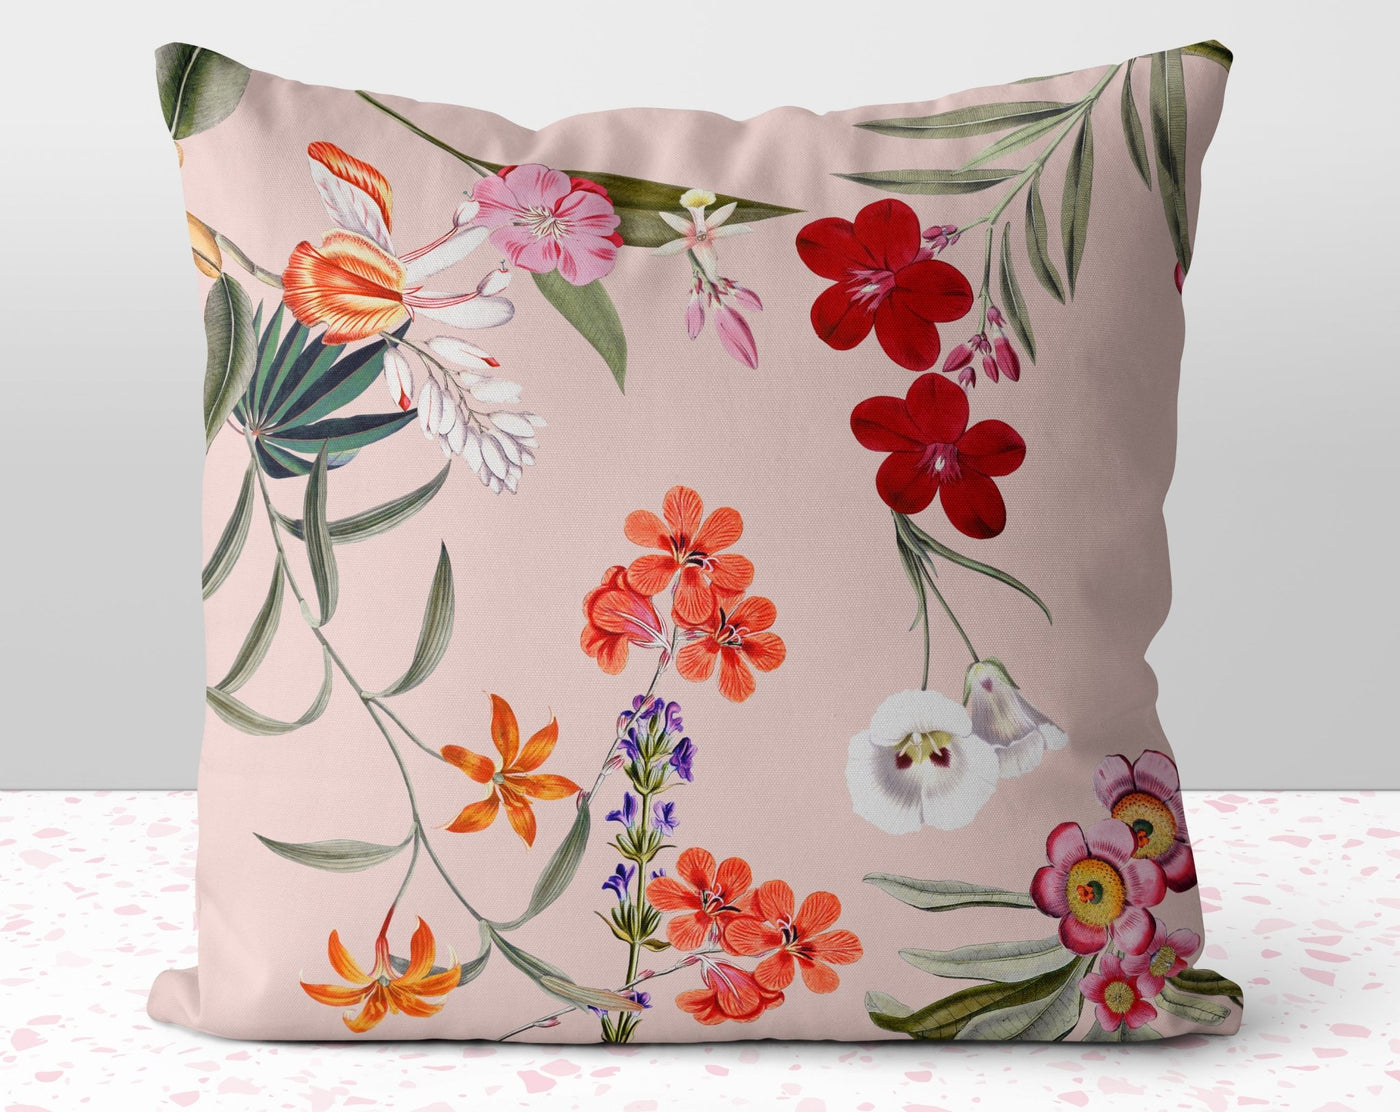 Fresh Floral Flowers on Rose Pink Pillow Throw Cover with Insert - Cush Potato Pillows